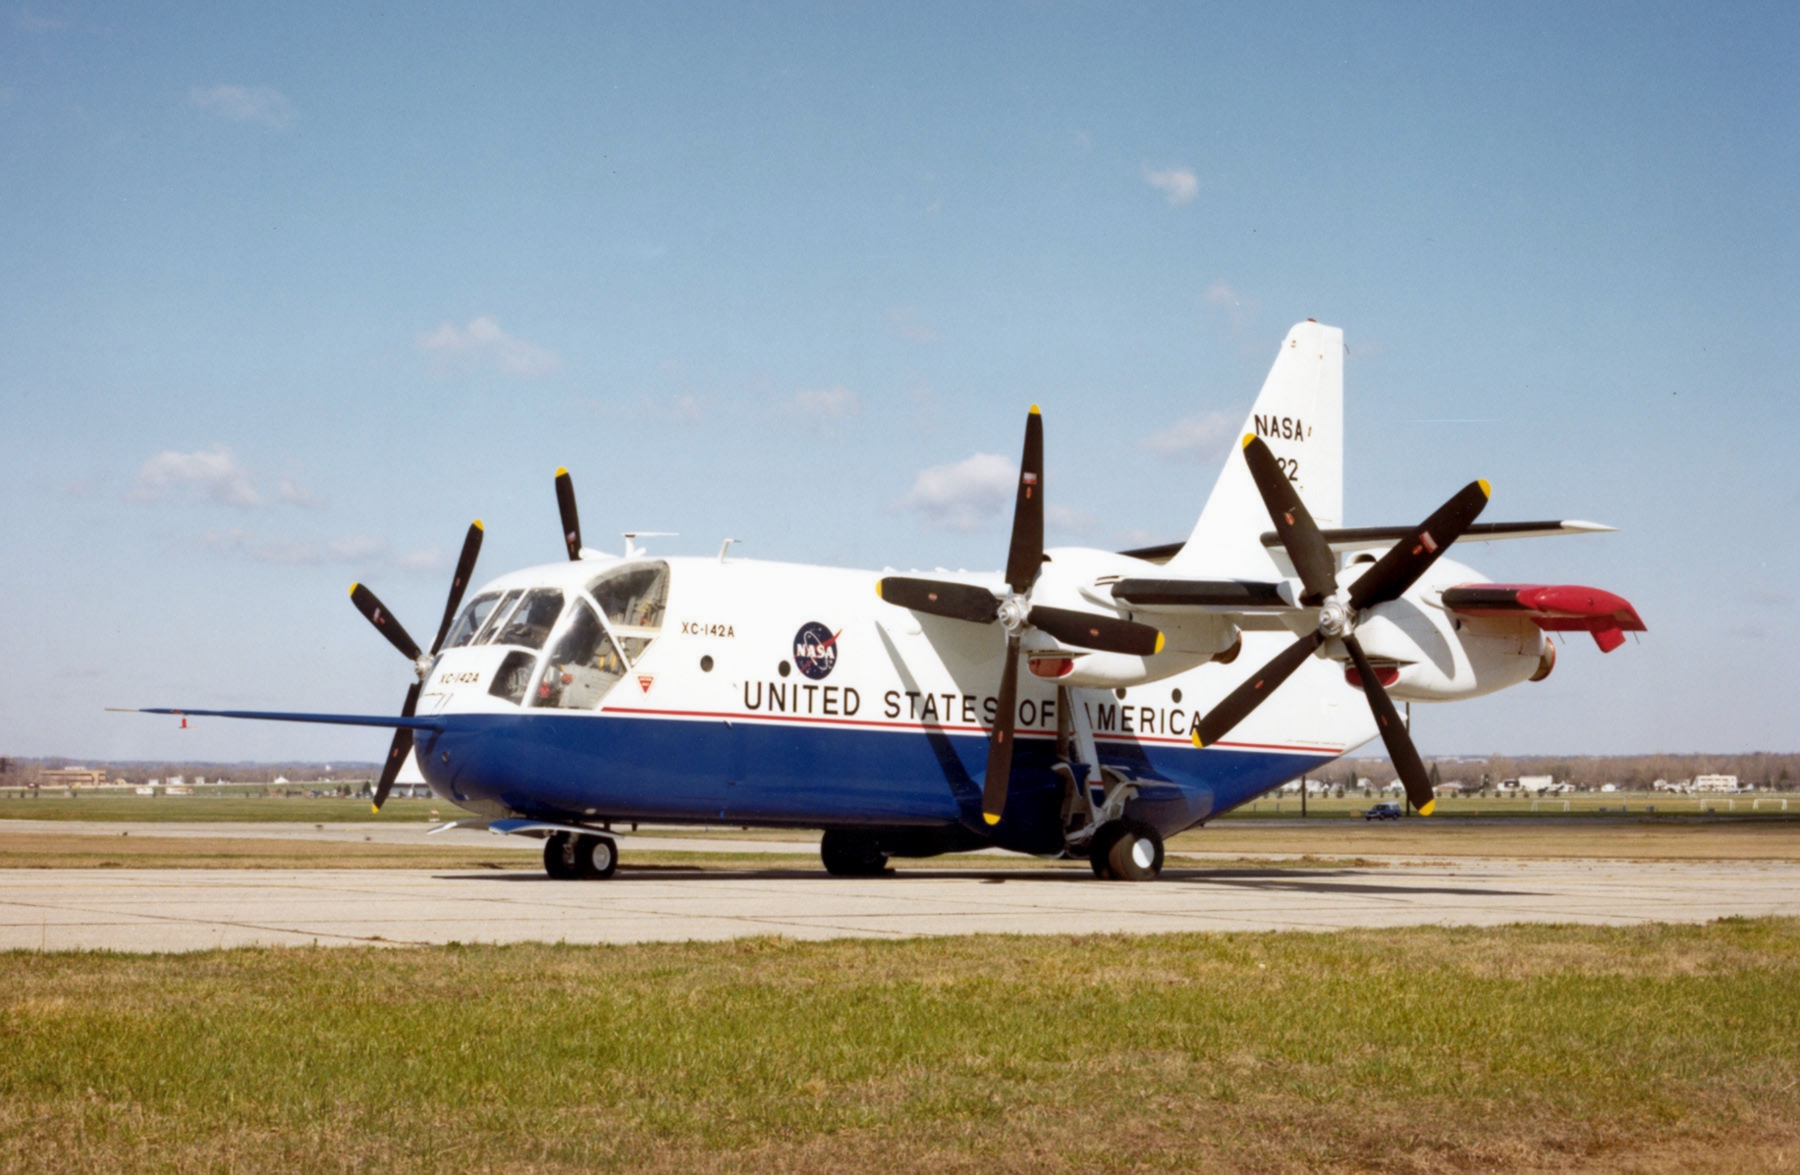 Ling-temco-vought Xc-142 #6